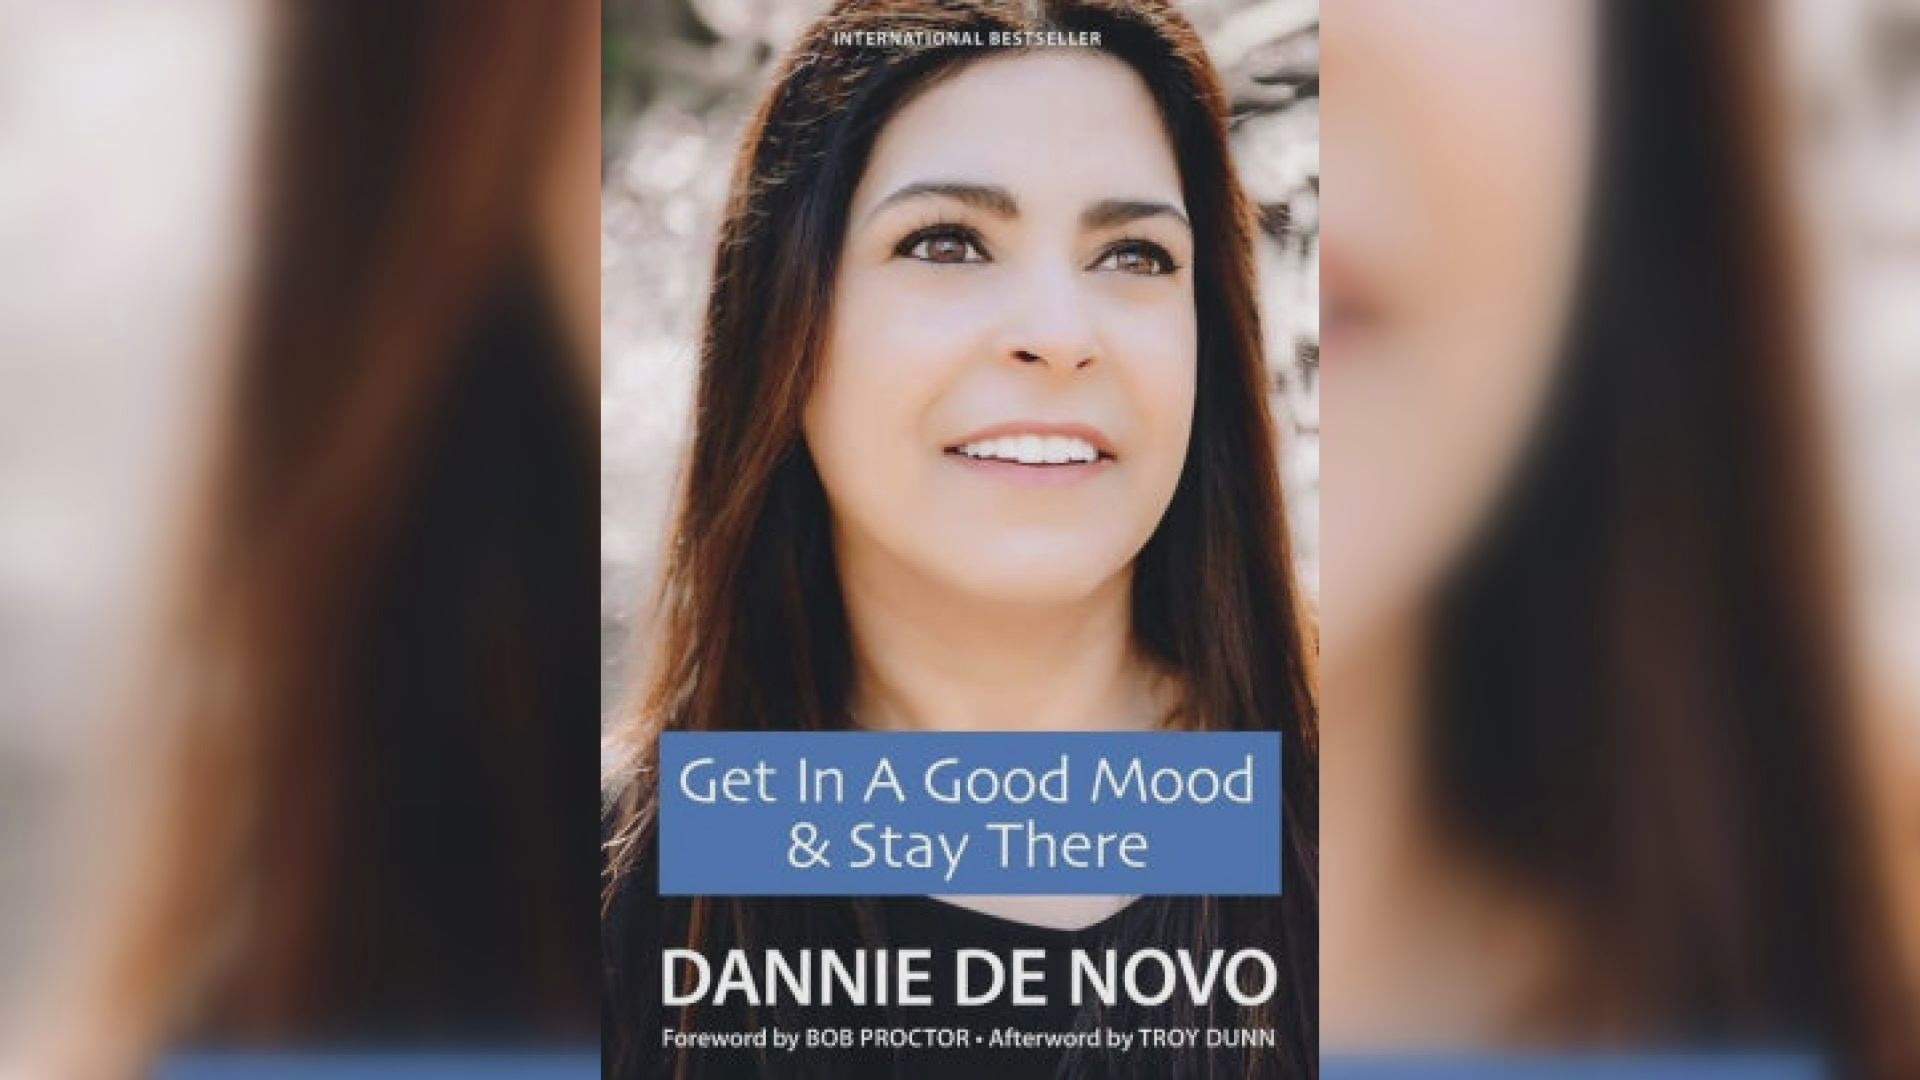 Author Dannie De Novo shares advice from her book, "Get in a Good Mood & Stay There," on handling loneliness during quarantine.